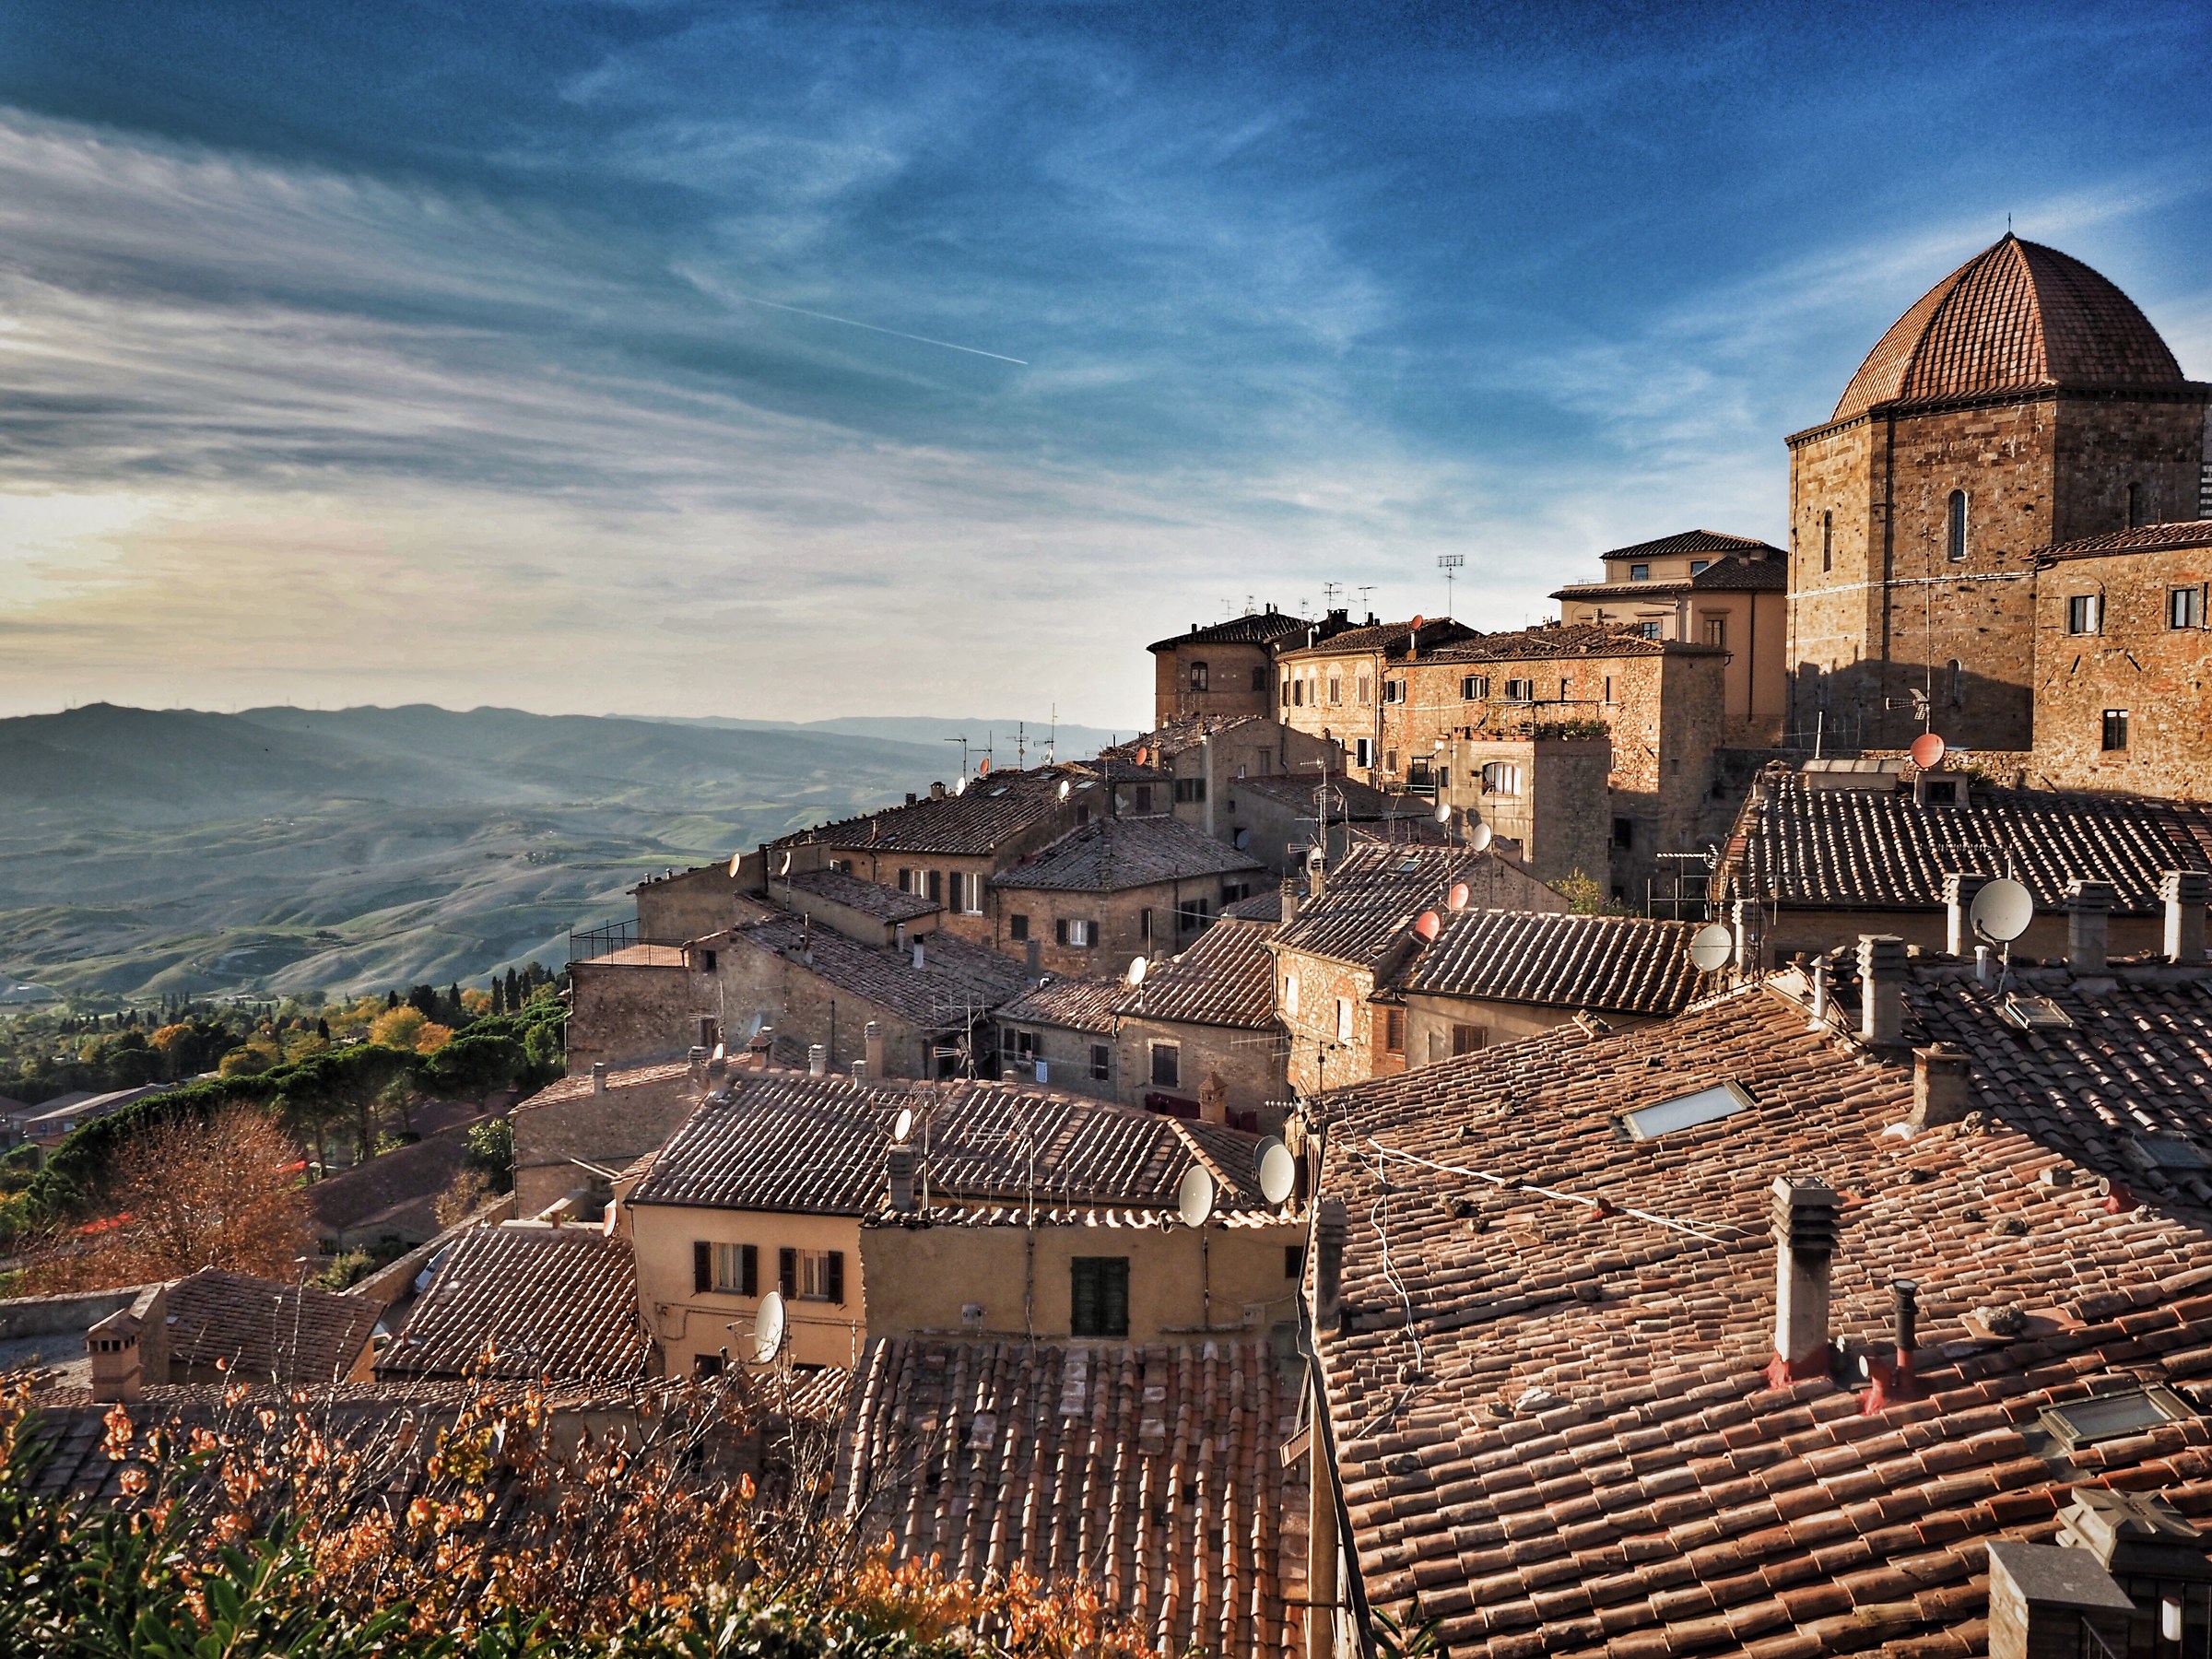 Volterra and its roofs...